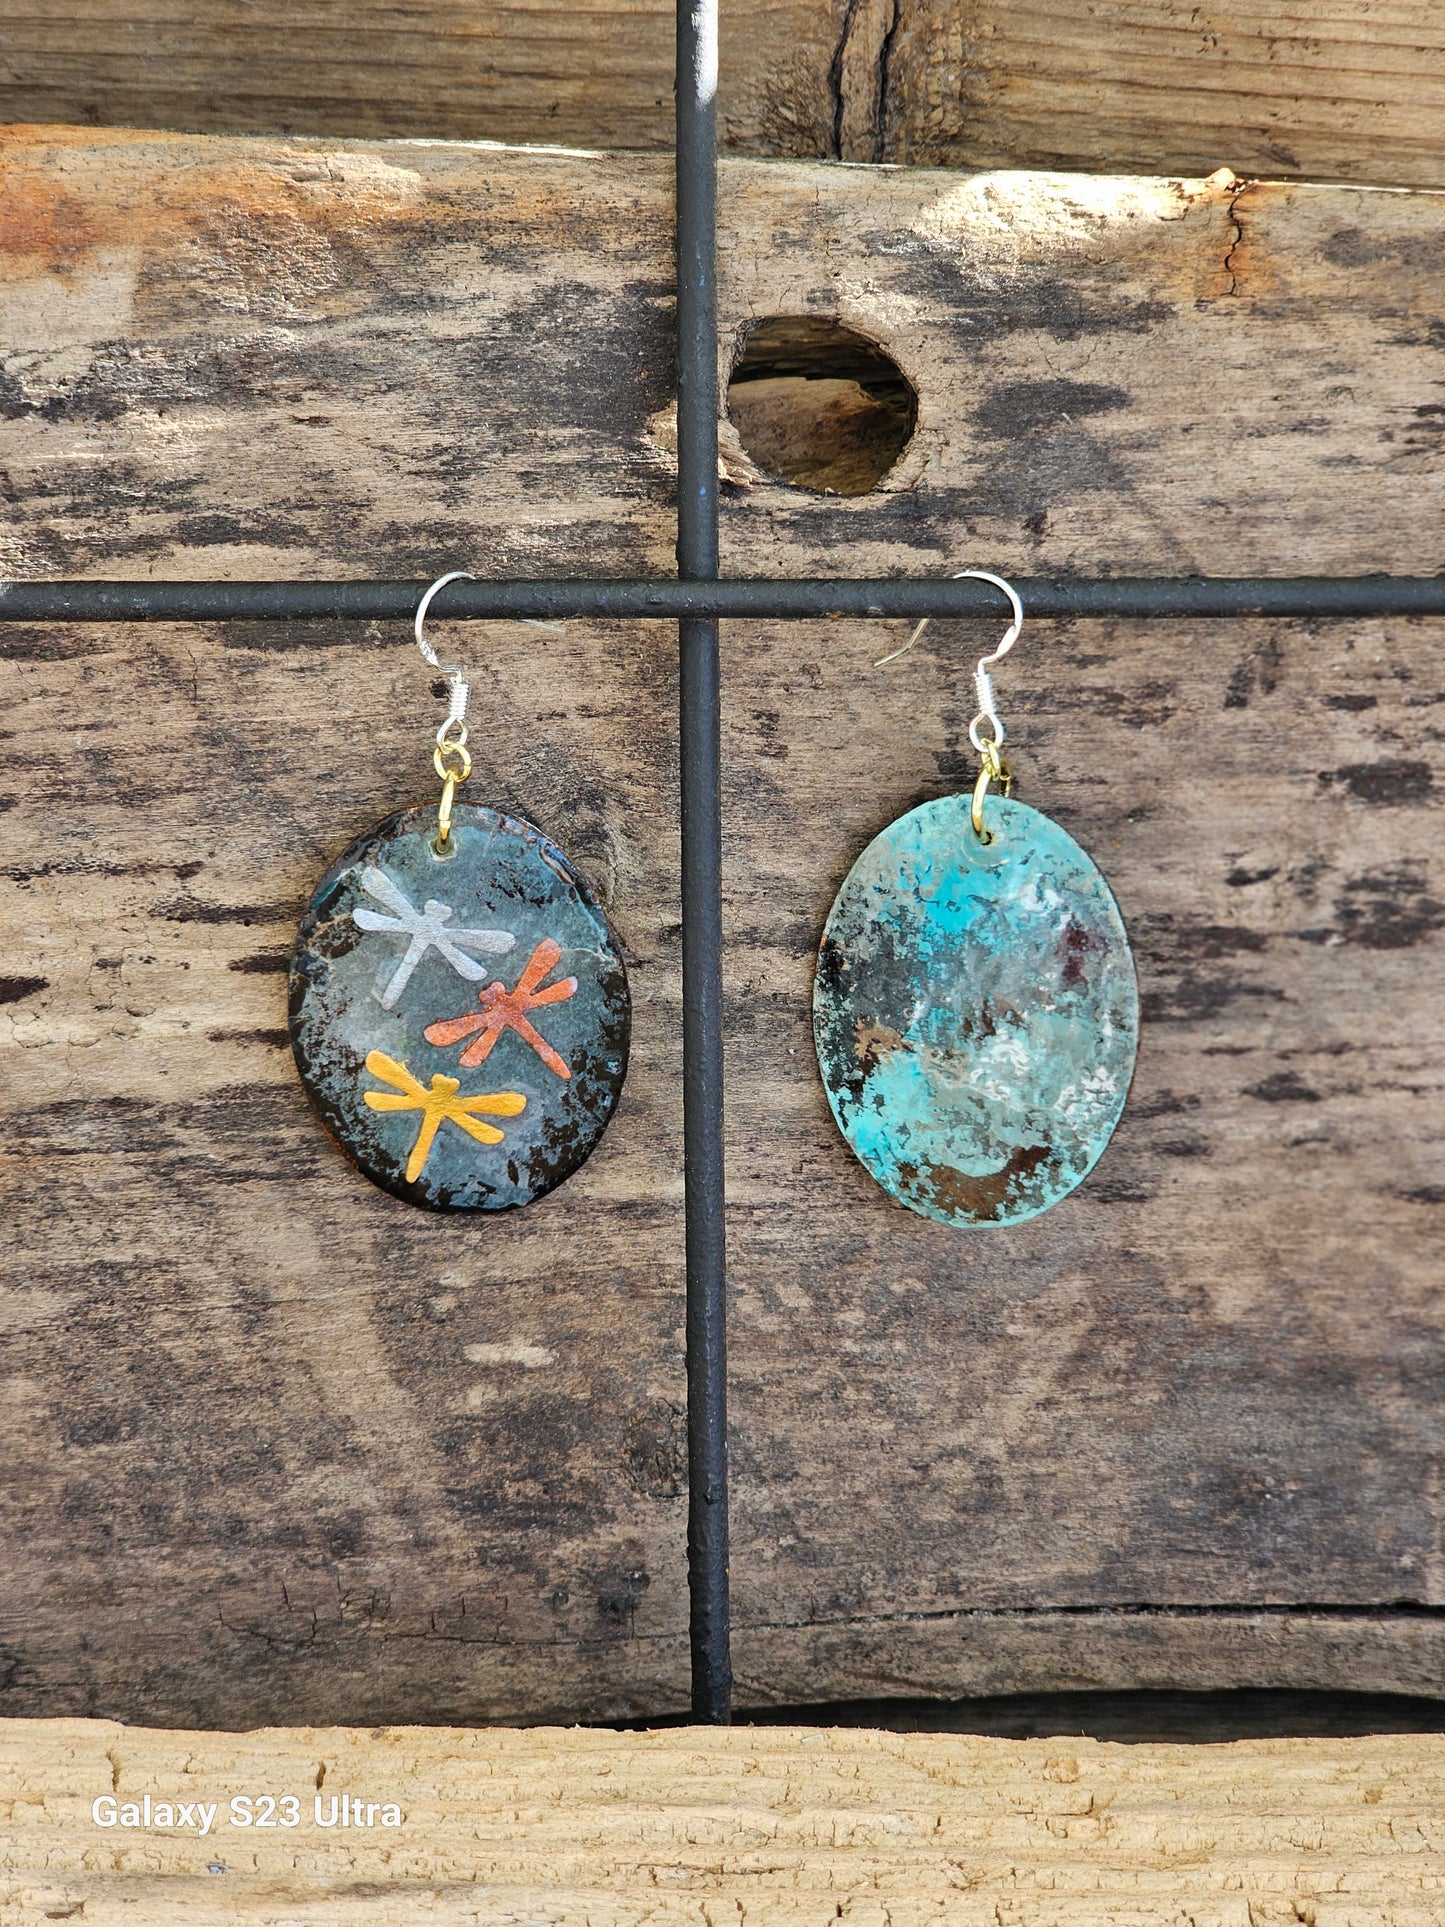 Hand painted Watercolor Mixed Media Collage Dragonfly Trinity. Ultra lightweight paper earrings. Grey blue patina background.  Layered collage with copper, silver and gold painted paper dragonflies.  Edged in dark brown patina. Back is painted in complimentary color. Oval in shape. Combination of14kg over sterling silver  and Sterling silver findings. Hangs 1 3/4" in Length